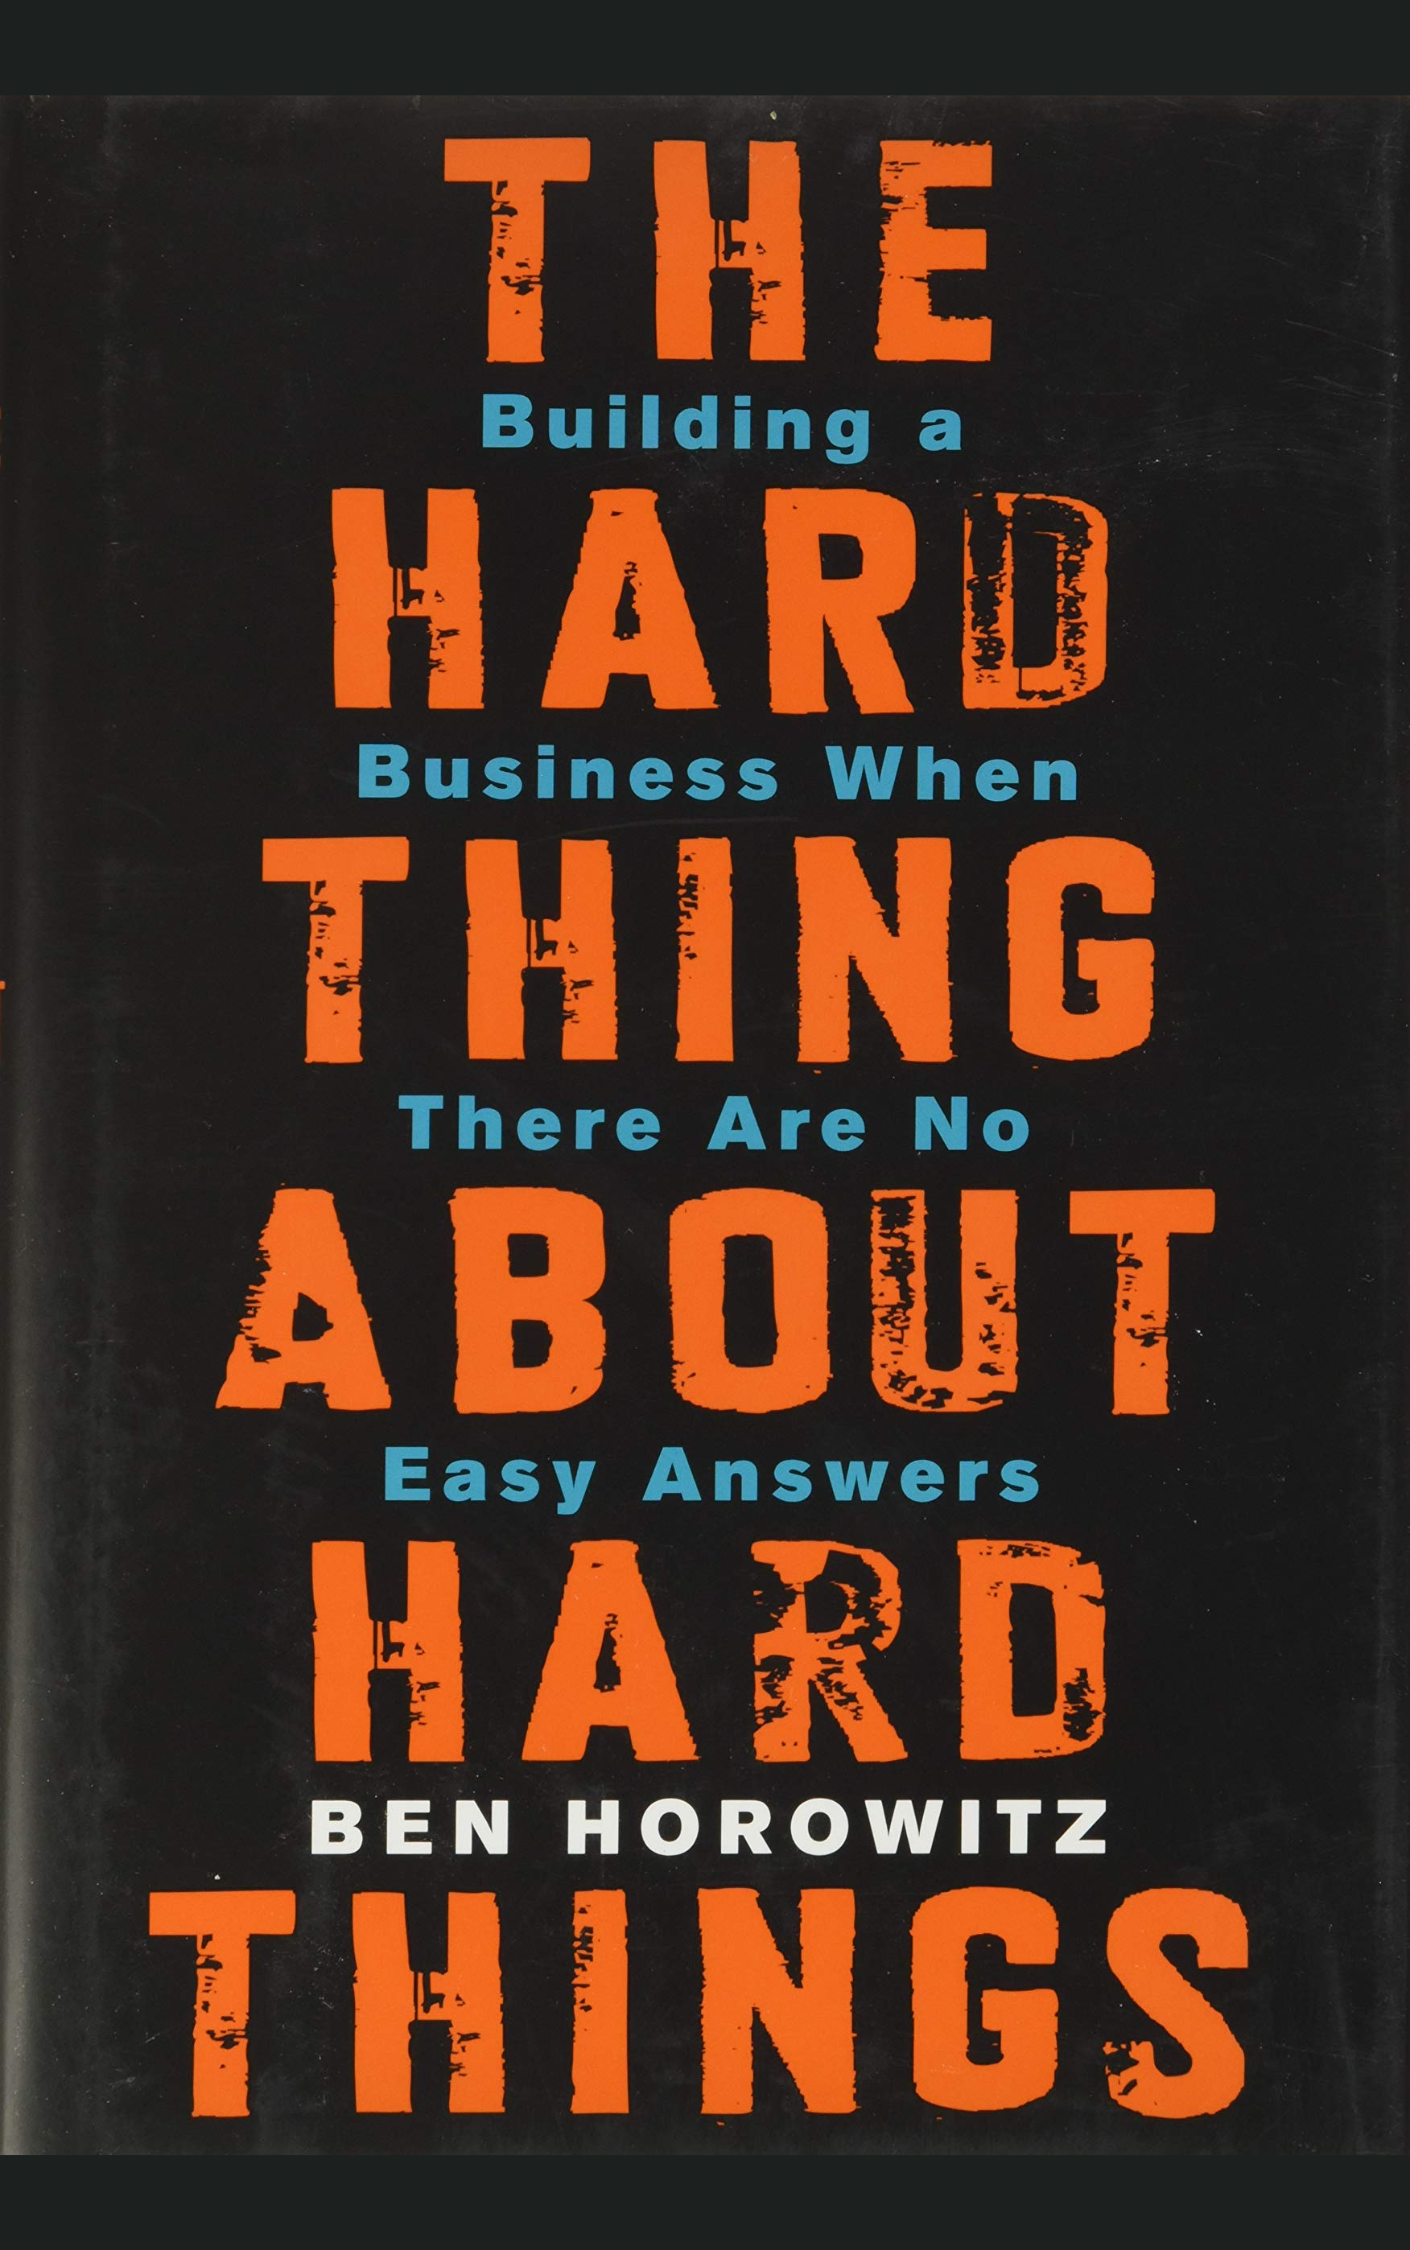 THE HARD THING ABOUT HARD THINGS By BEN HOROWITZ